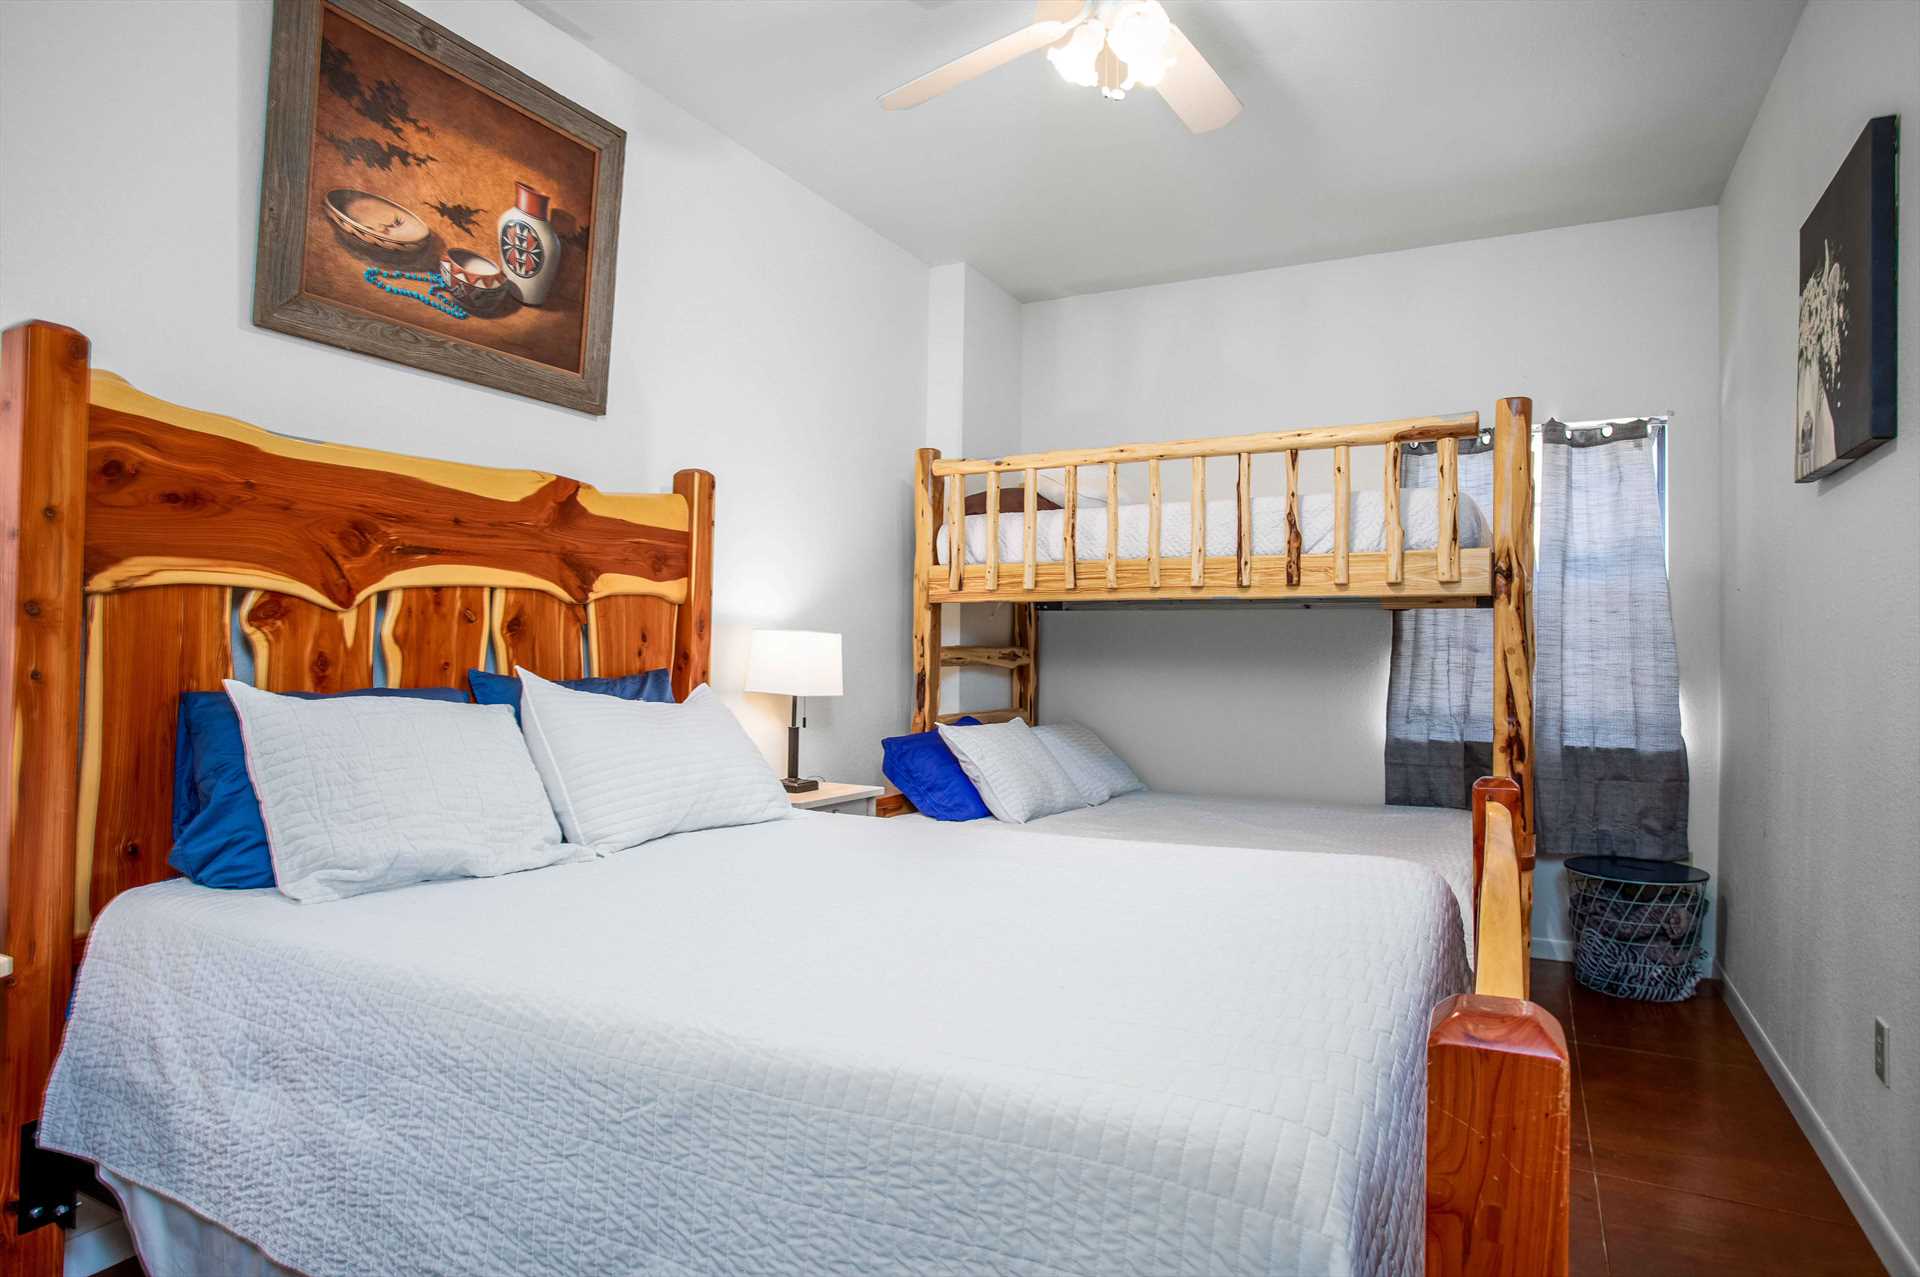                                                 The first of four bedrooms at the Lodge features a roomy queen-sized bed and a twin/full bunk bed setup. Clean linens for all sleeping spaces are provided, too!